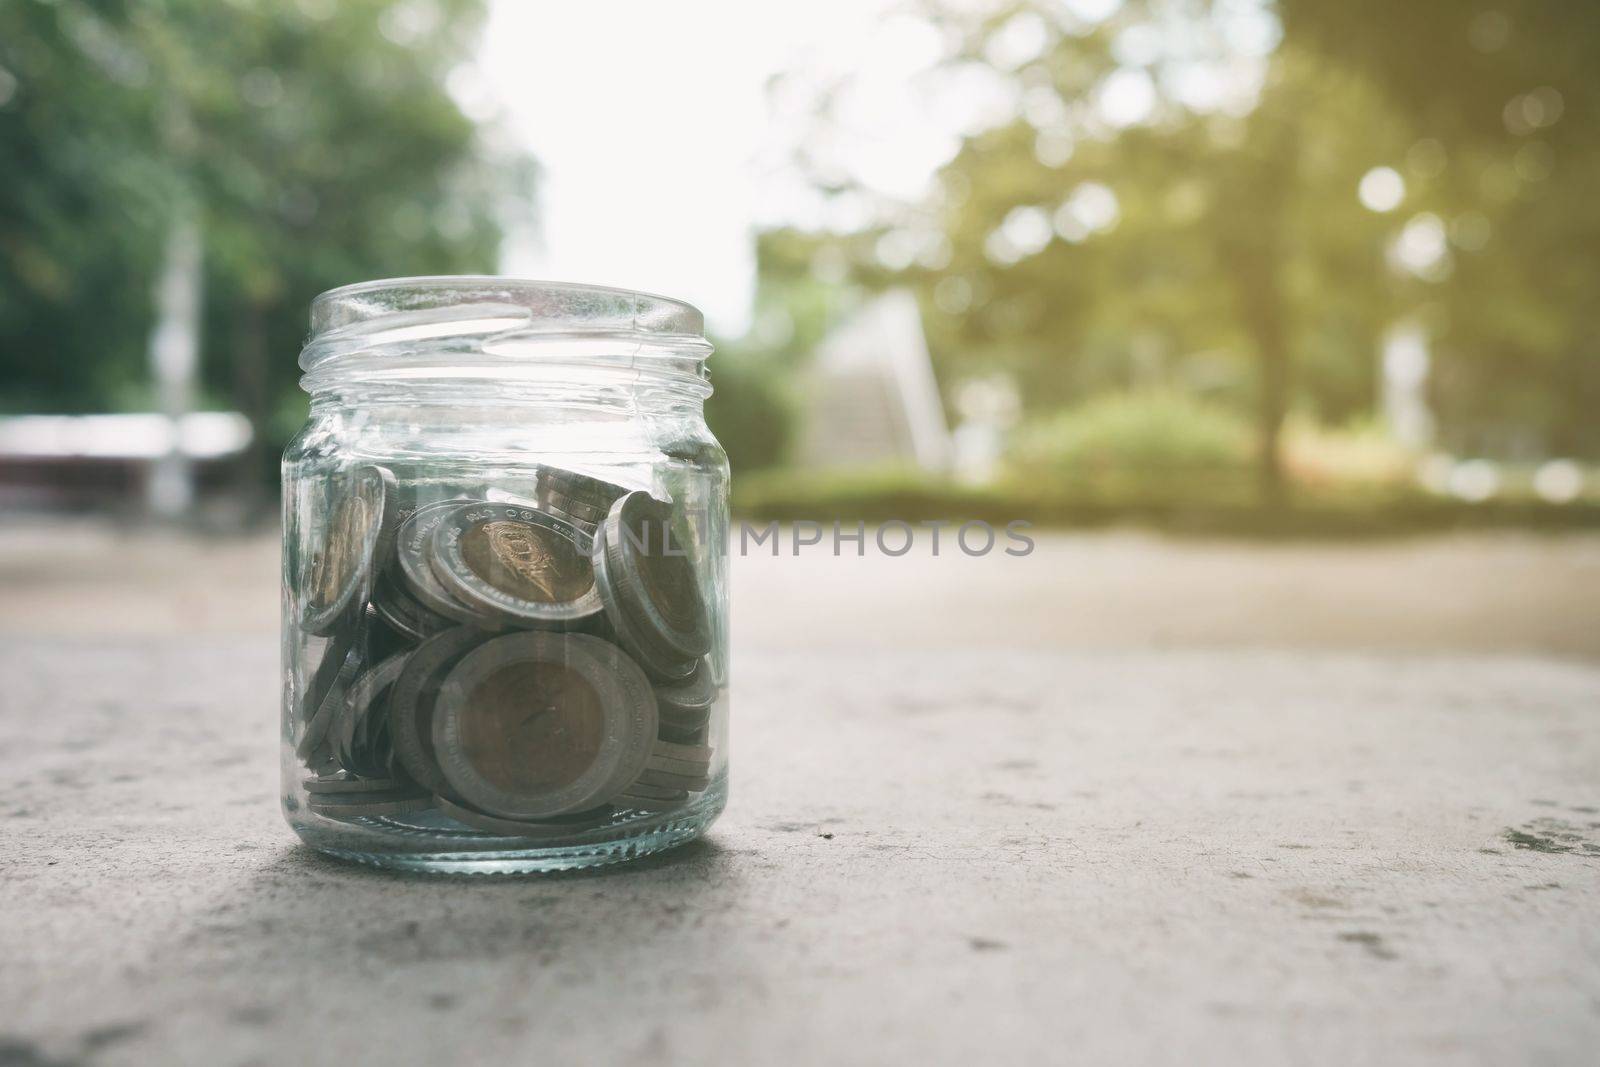 Coins in Glass Jar in Park with Light Leak. Translation Text on Coin is "Thailand, 10 Bath". (Baht is Currency of Thailand)